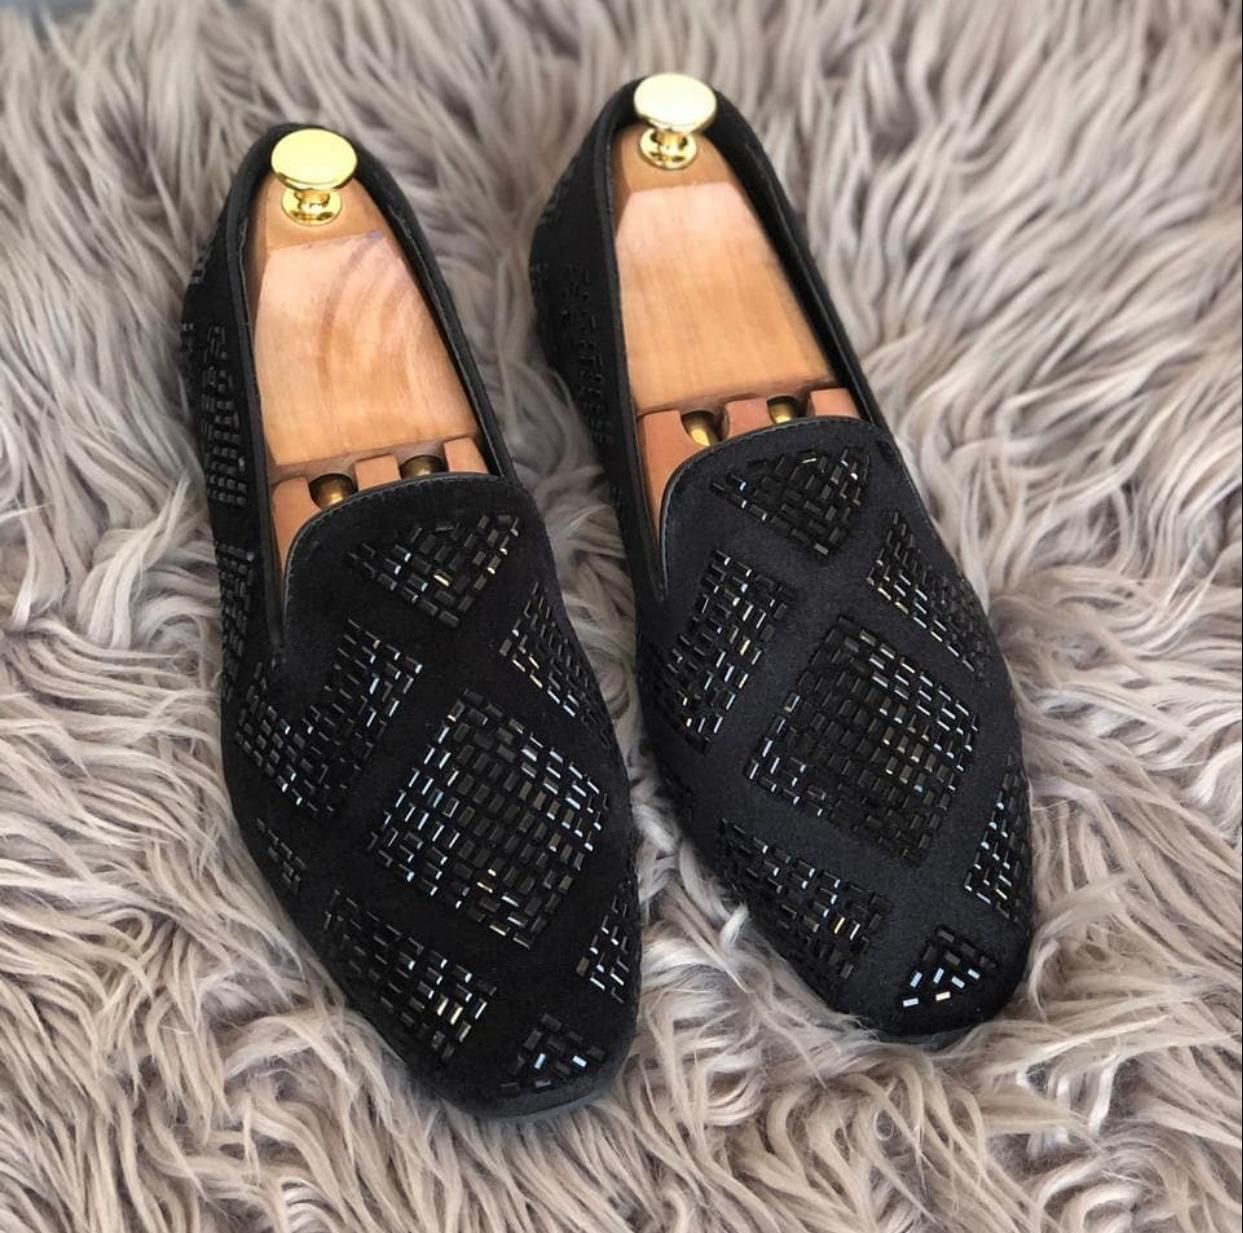 Buy Now Stylish Studded Moccasin Shoes For Party and Wedding Occasion - JackMarc - JACKMARC.COM